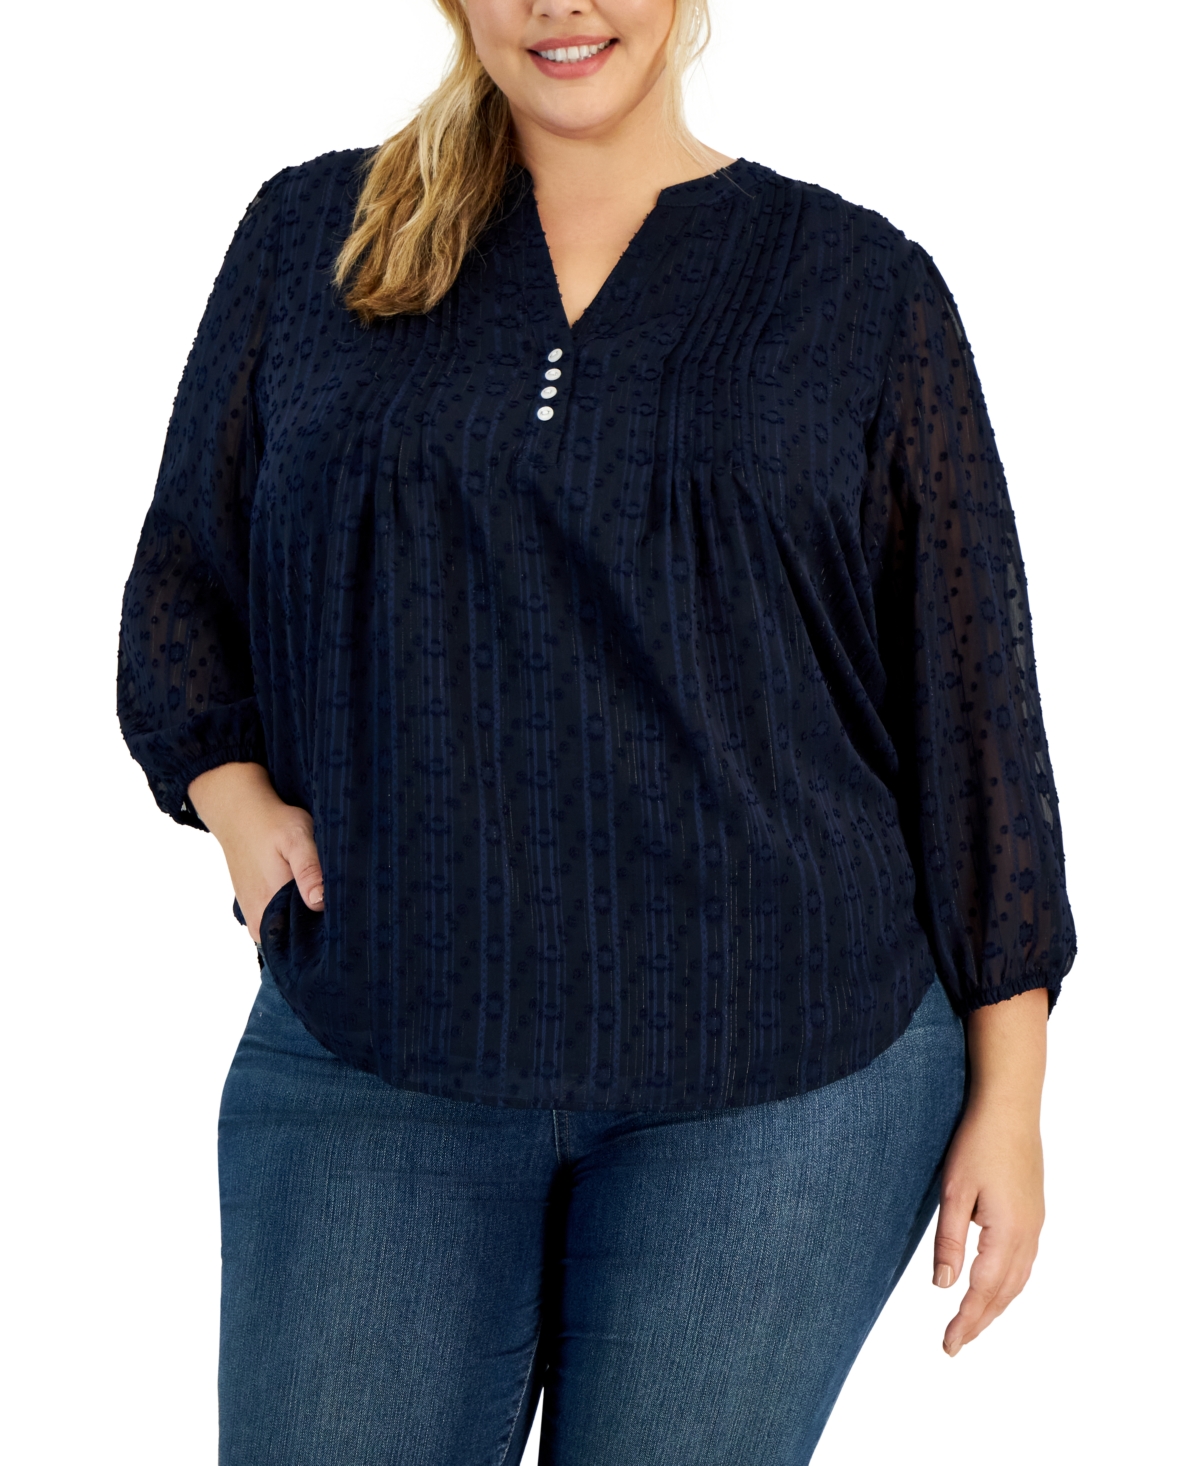 TOMMY HILFIGER PLUS SIZE DAISY CLIP PINTUCKED TUNIC TOP